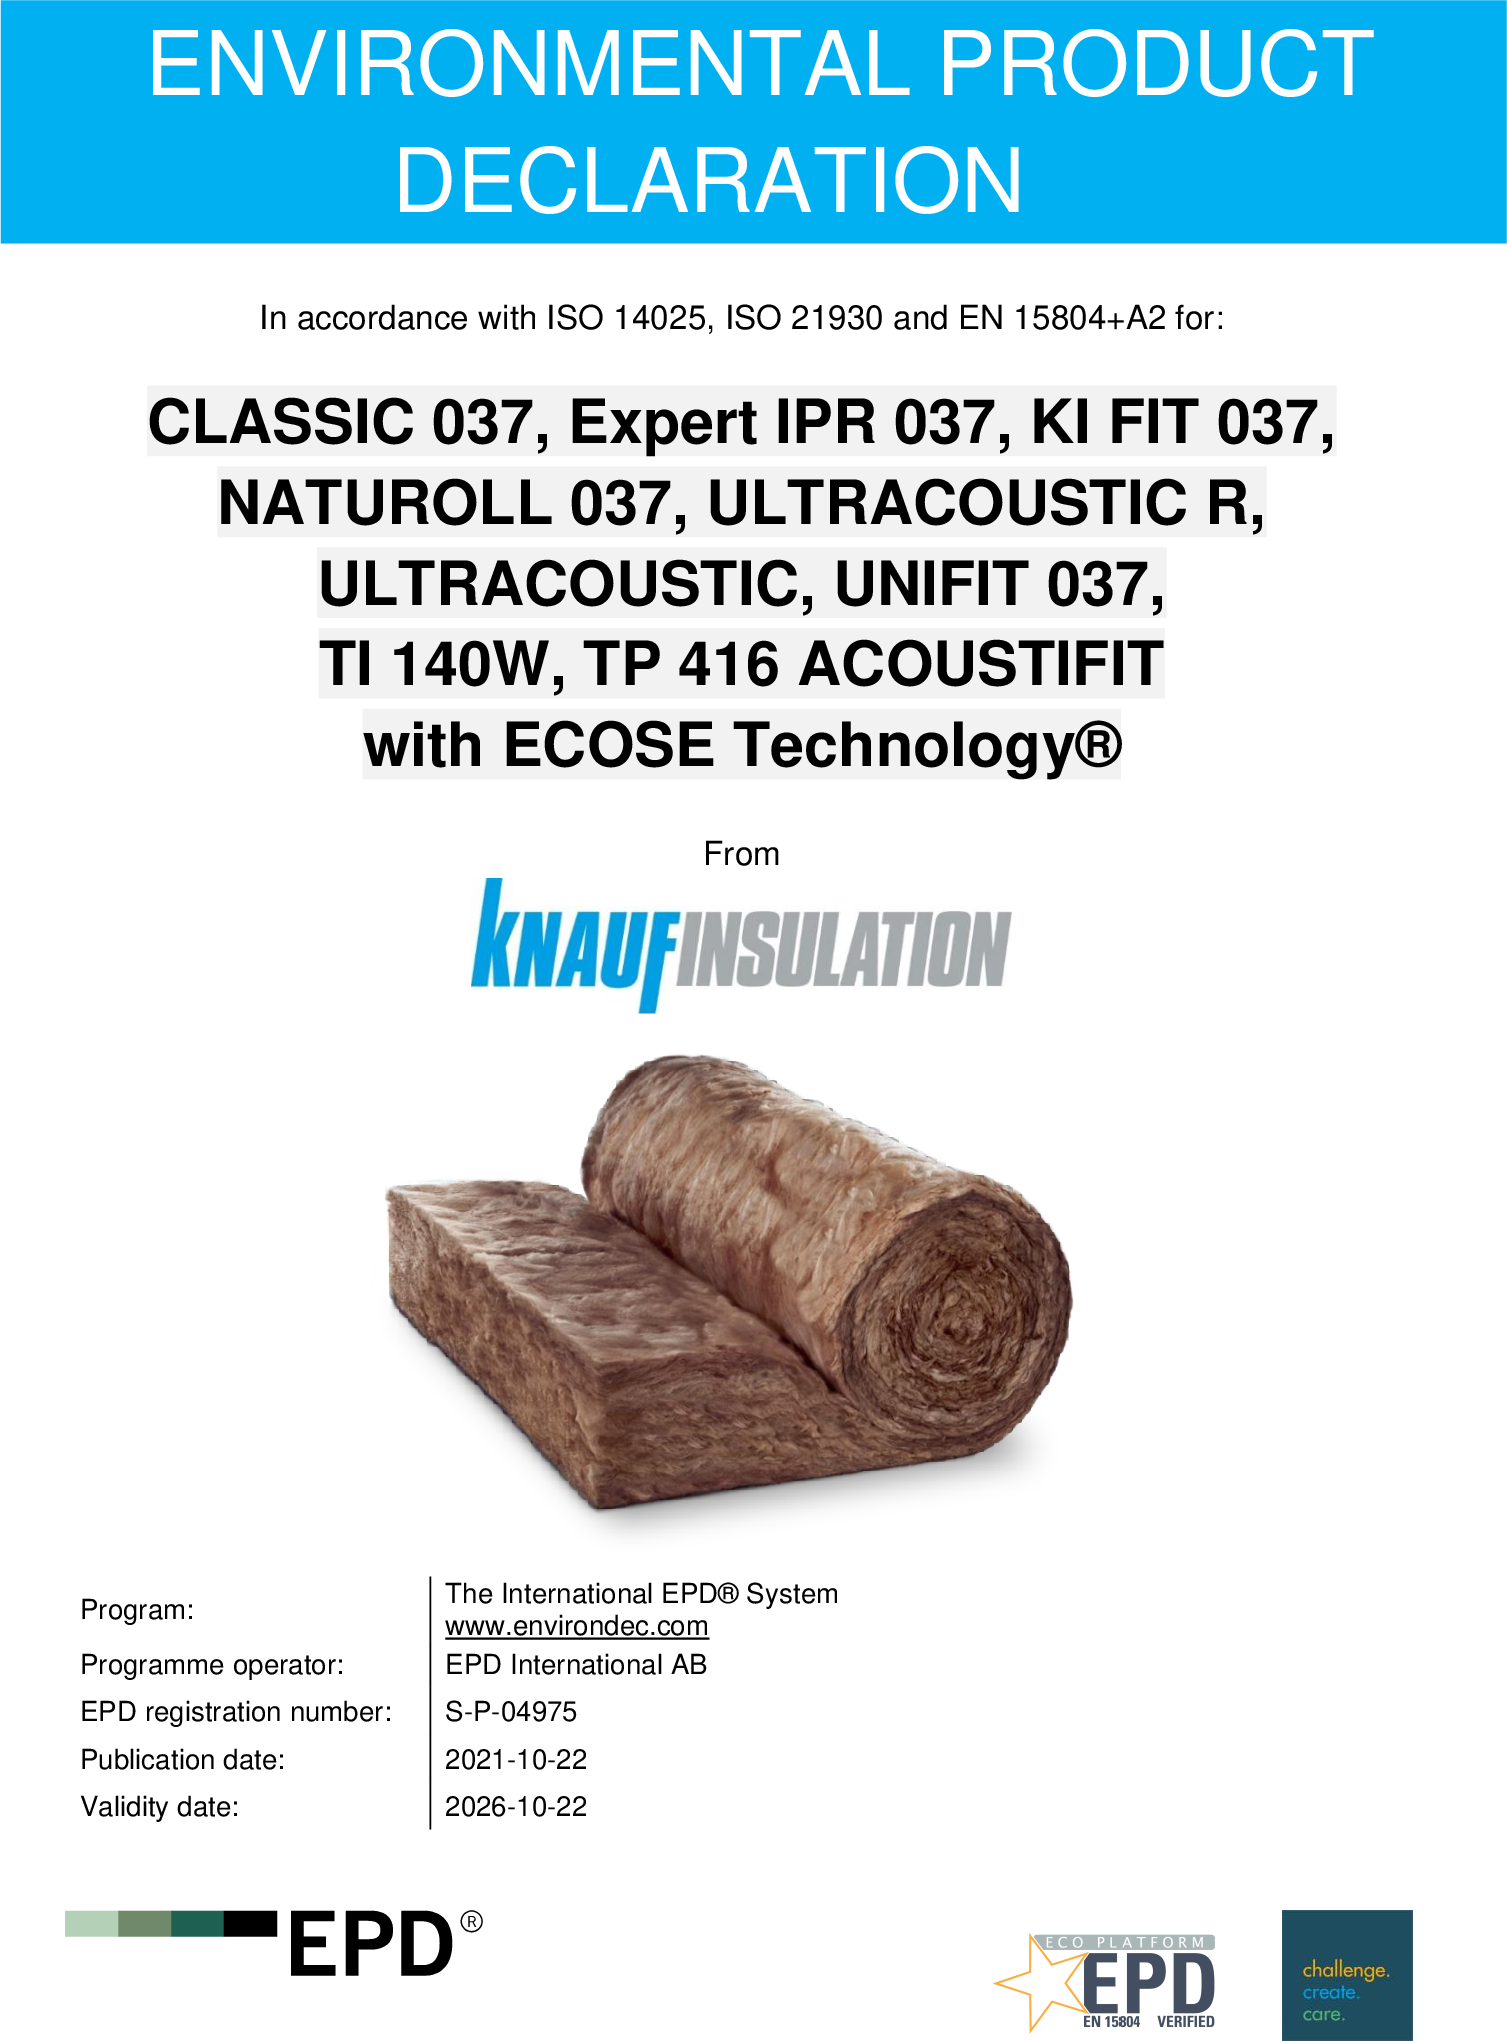 CLASSIC 037, Expert IPR 037, KI FIT 037,NATUROLL 037, ULTRACOUSTIC R,ULTRACOUSTIC, UNIFIT 037, TI 140W, TP 416 ACOUSTIFIT with ECOSE Technology®